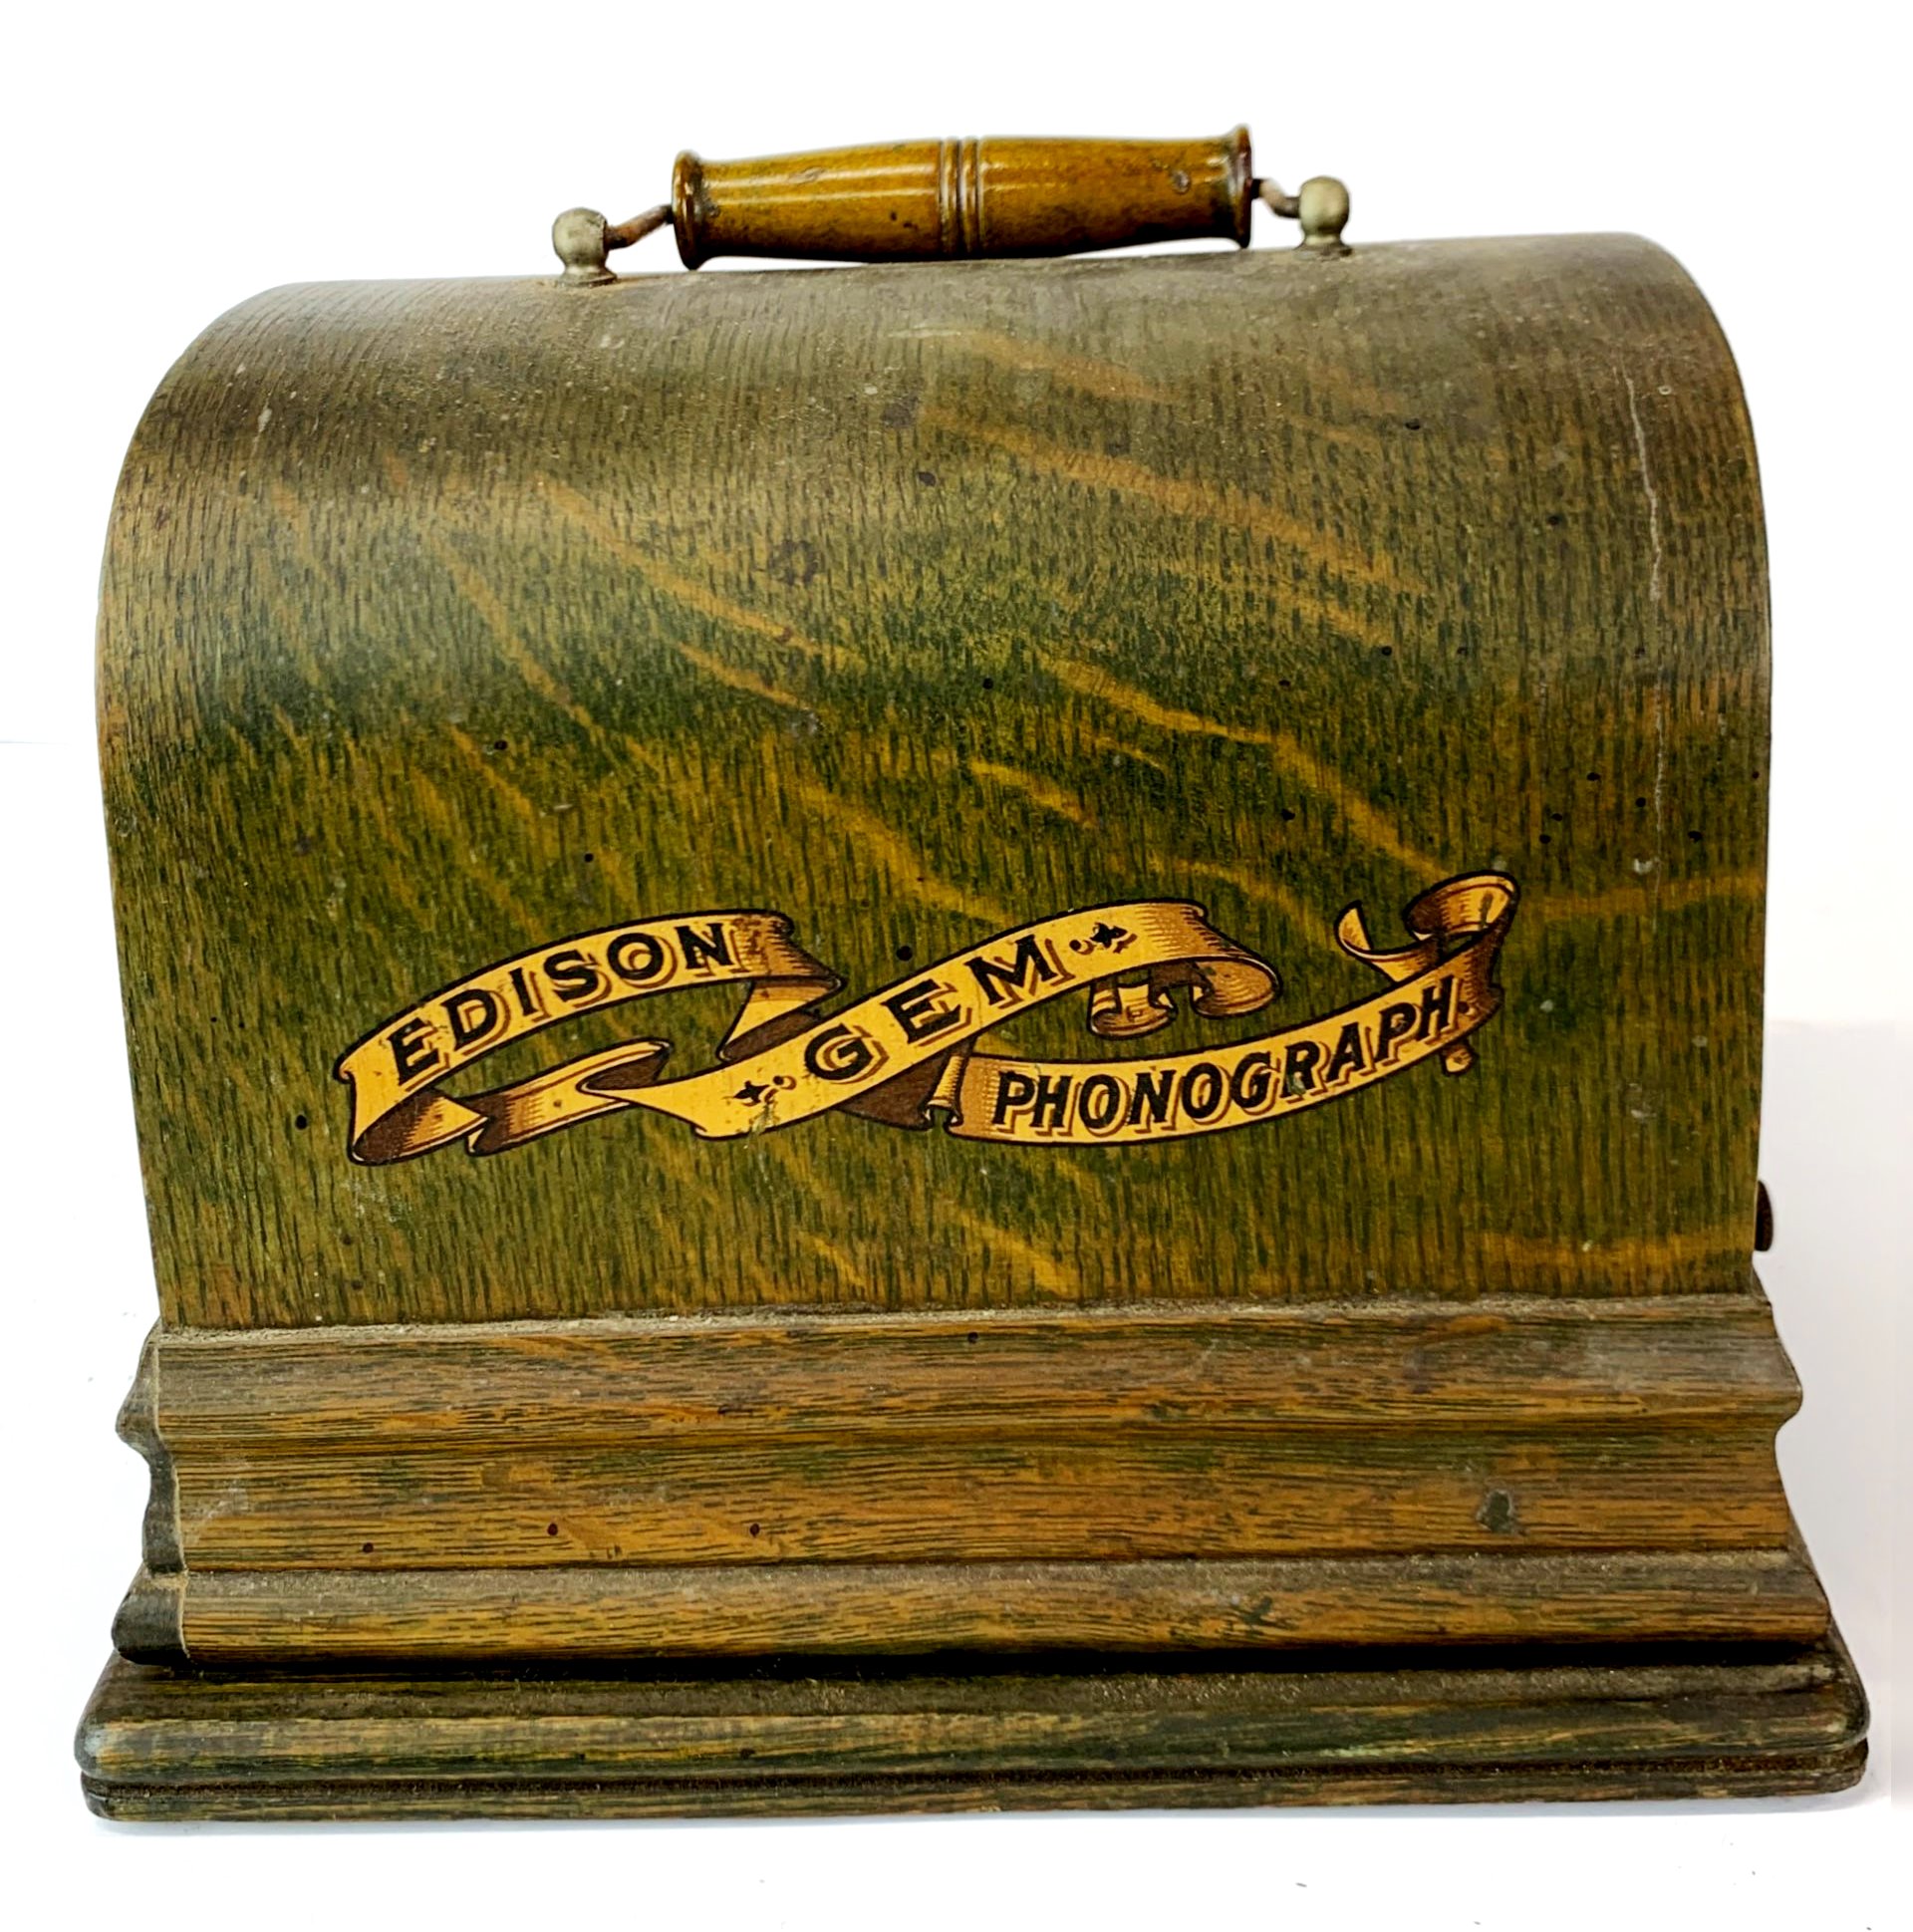 An early cased Thomas Edison gem wax cylinder phonograph. No horn or cylinders. - Image 2 of 4